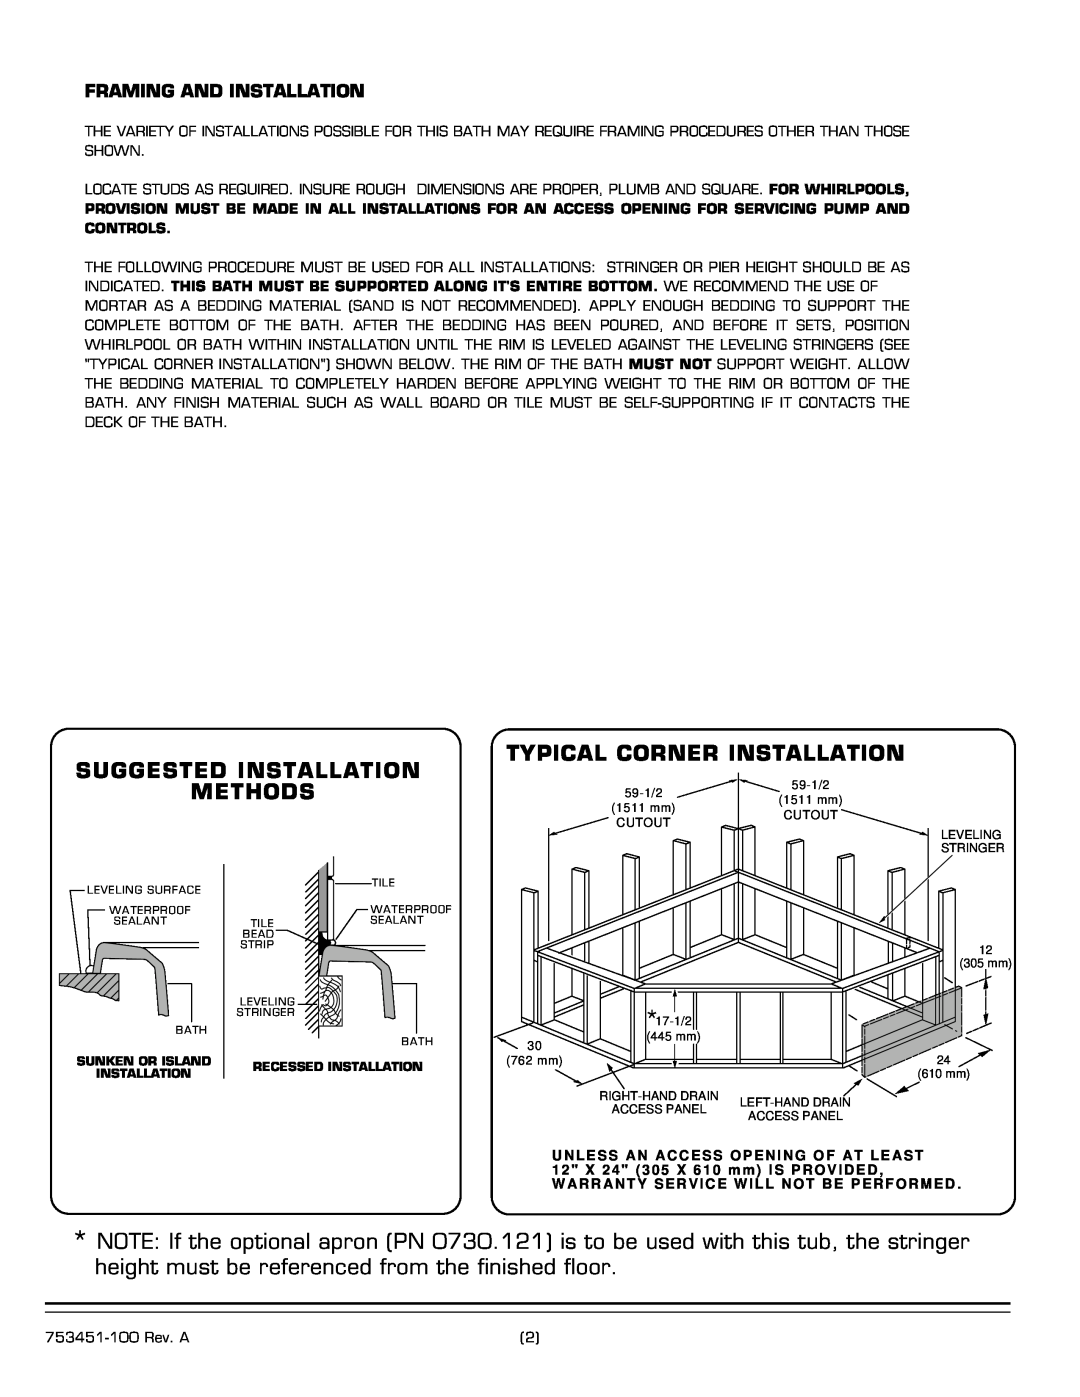 American Standard 1730 SERIES Suggested Installation, Typical Corner Installation, Methods, Framing And Installation 